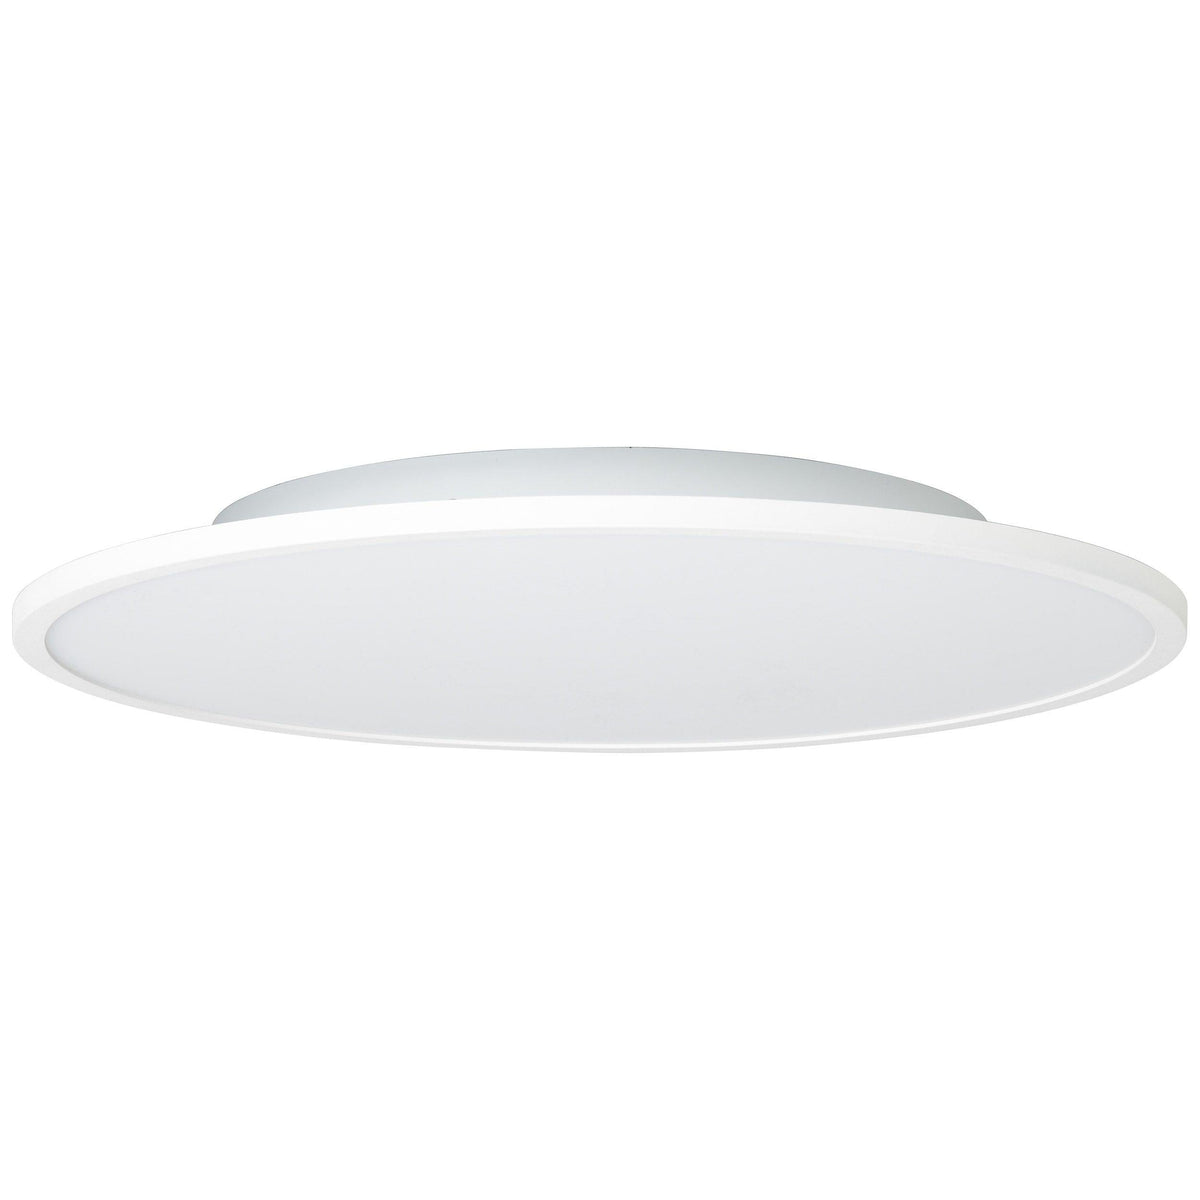 Brilliant 1 Light 30W Buffi LED Ceiling Panel - White &amp; Cold White | G96885A85 from DID Electrical - guaranteed Irish, guaranteed quality service. (6977601962172)